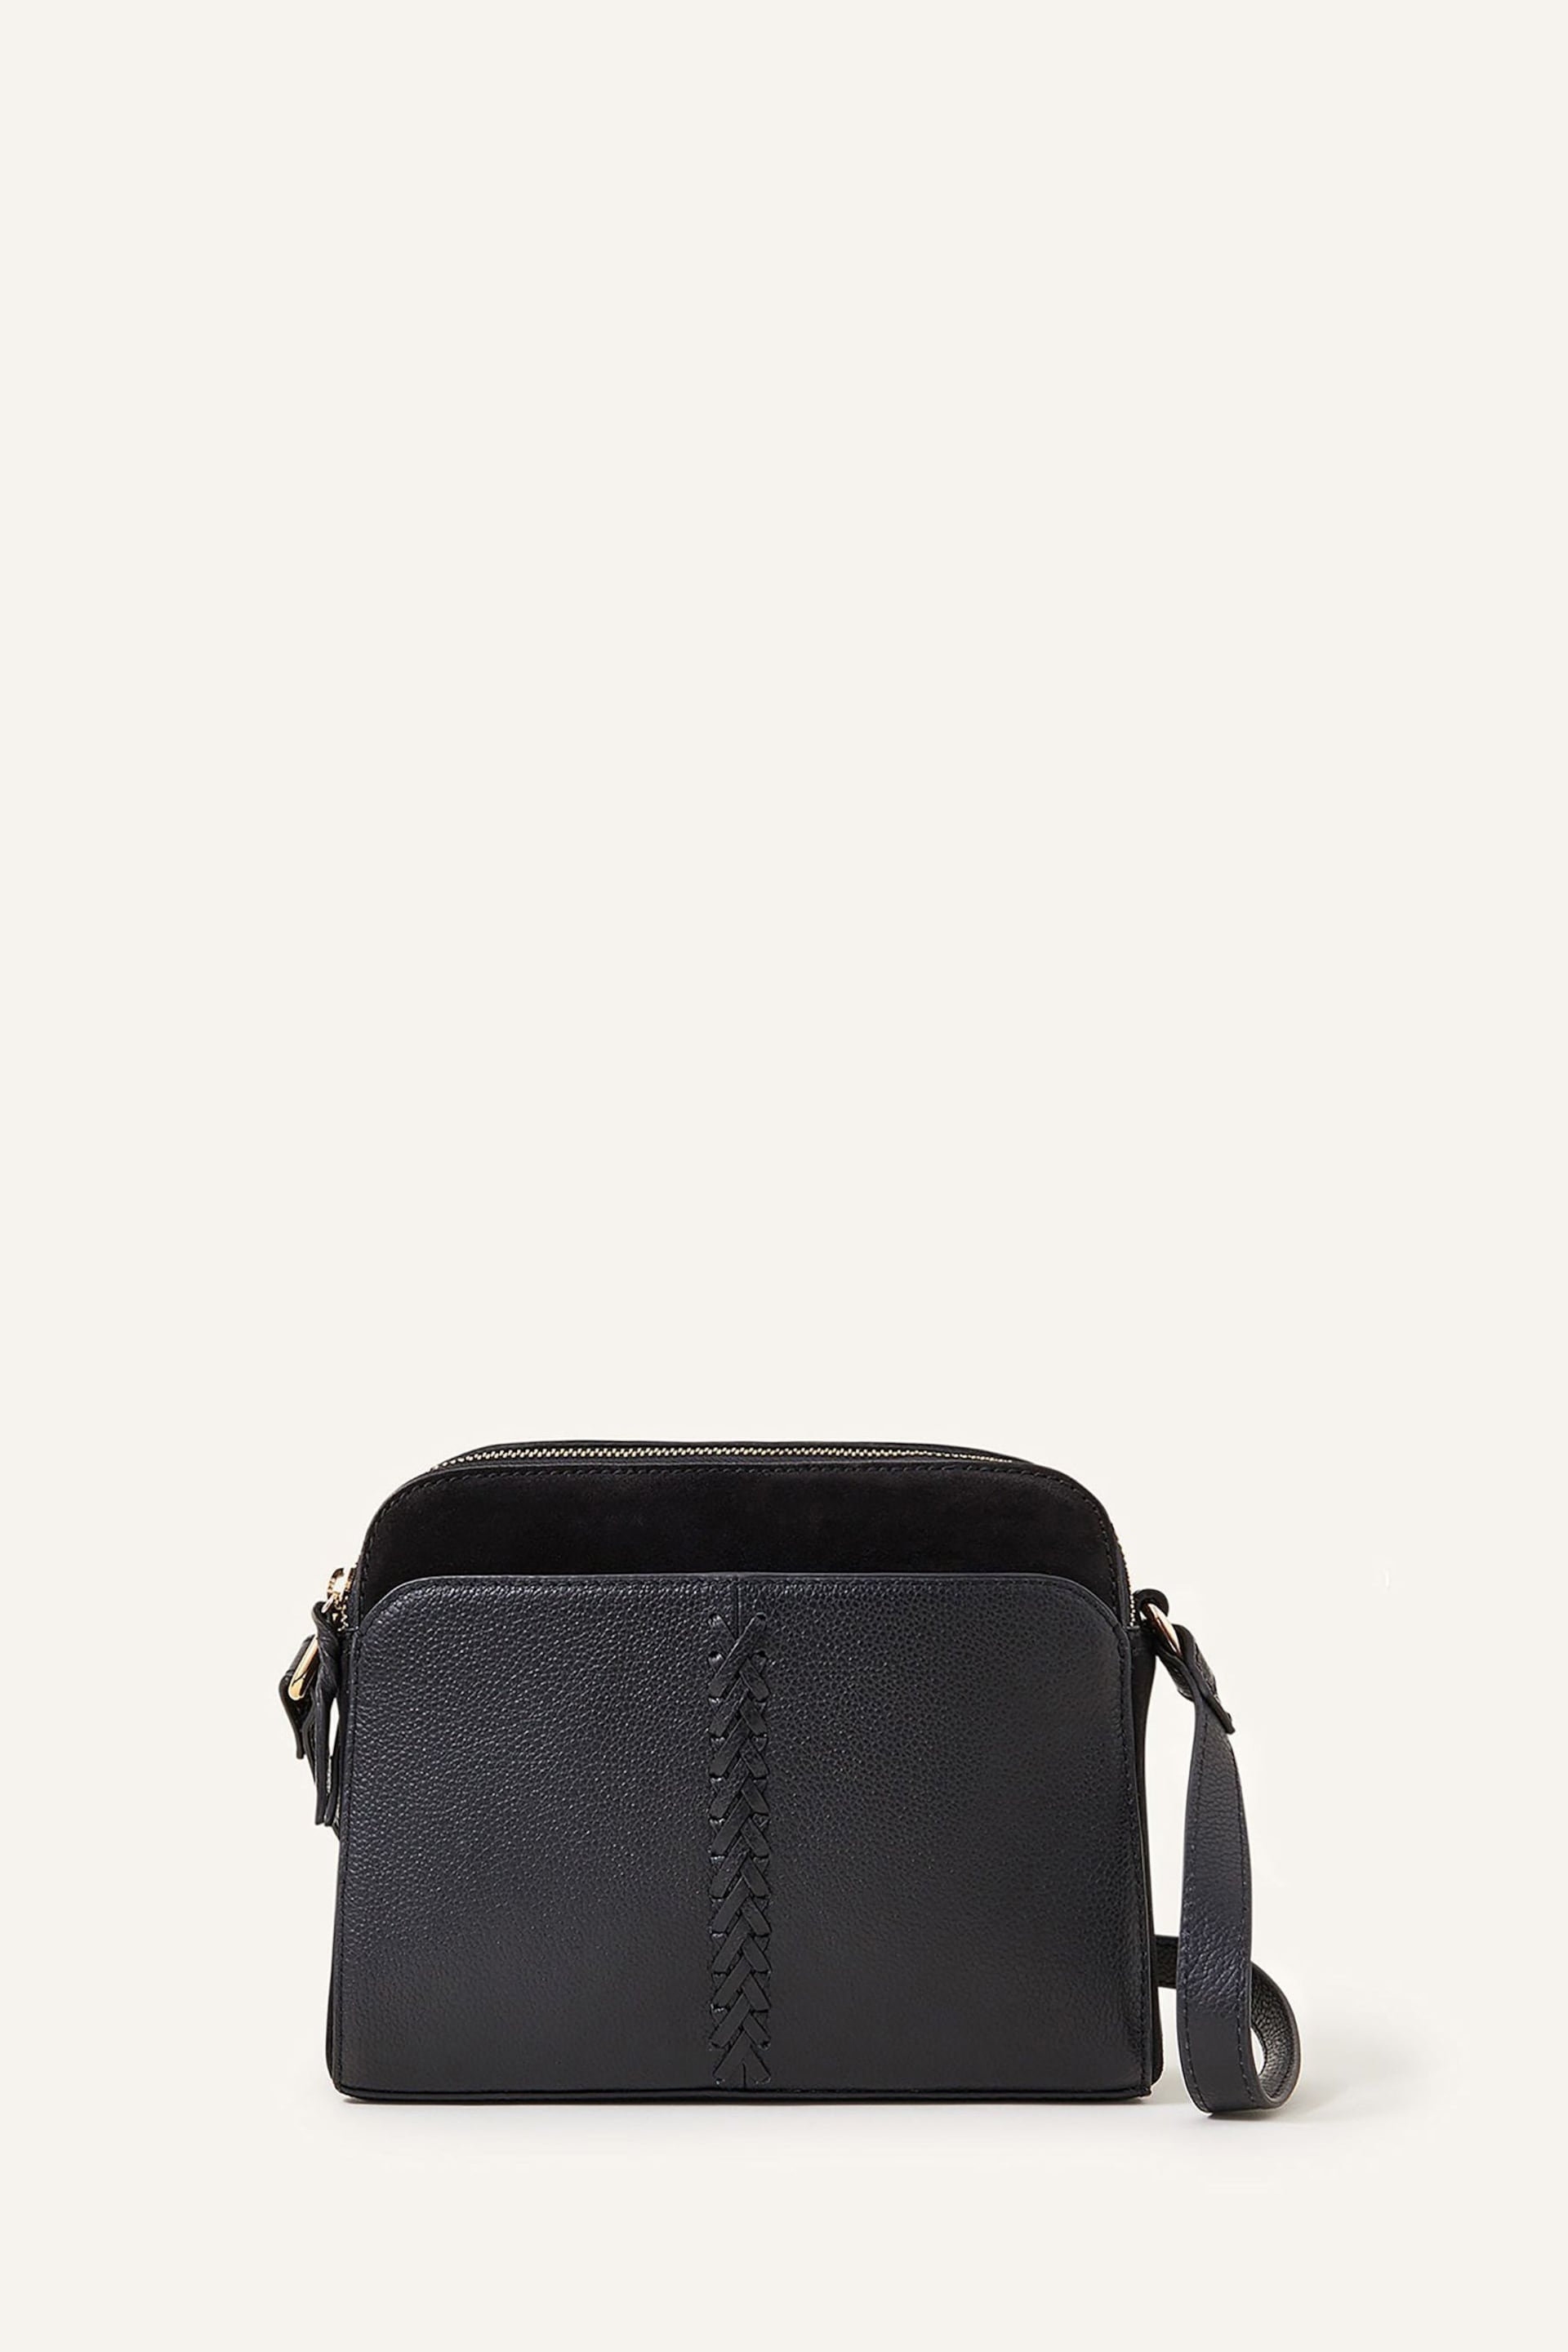 Accessorize Black Leather Double Zip Cross-Body Bag - Image 2 of 4